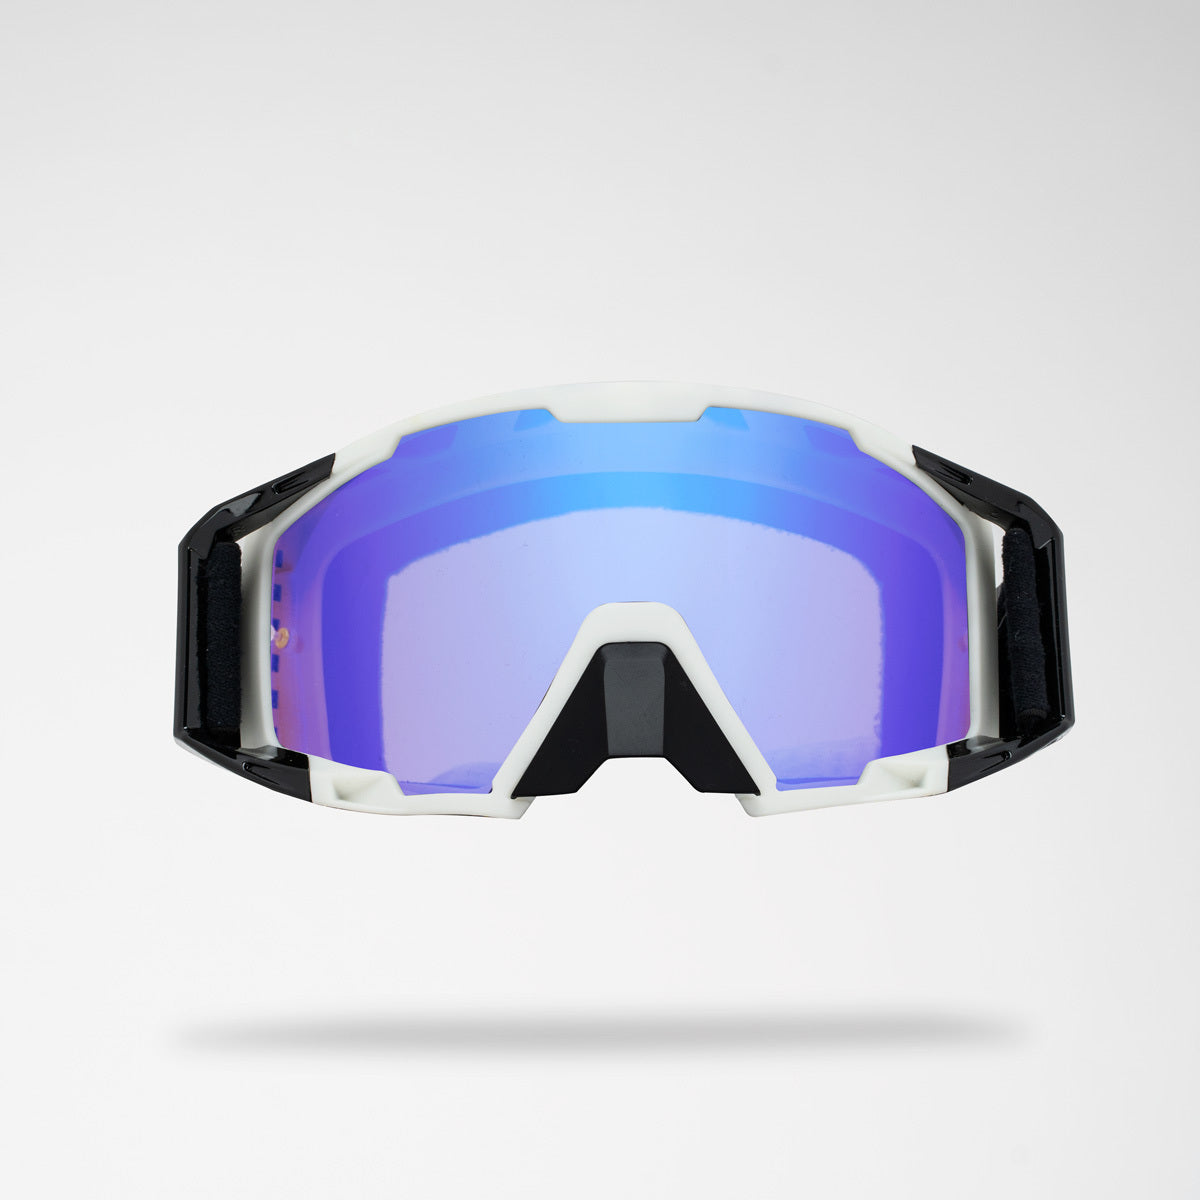 Voss One Mx Goggles